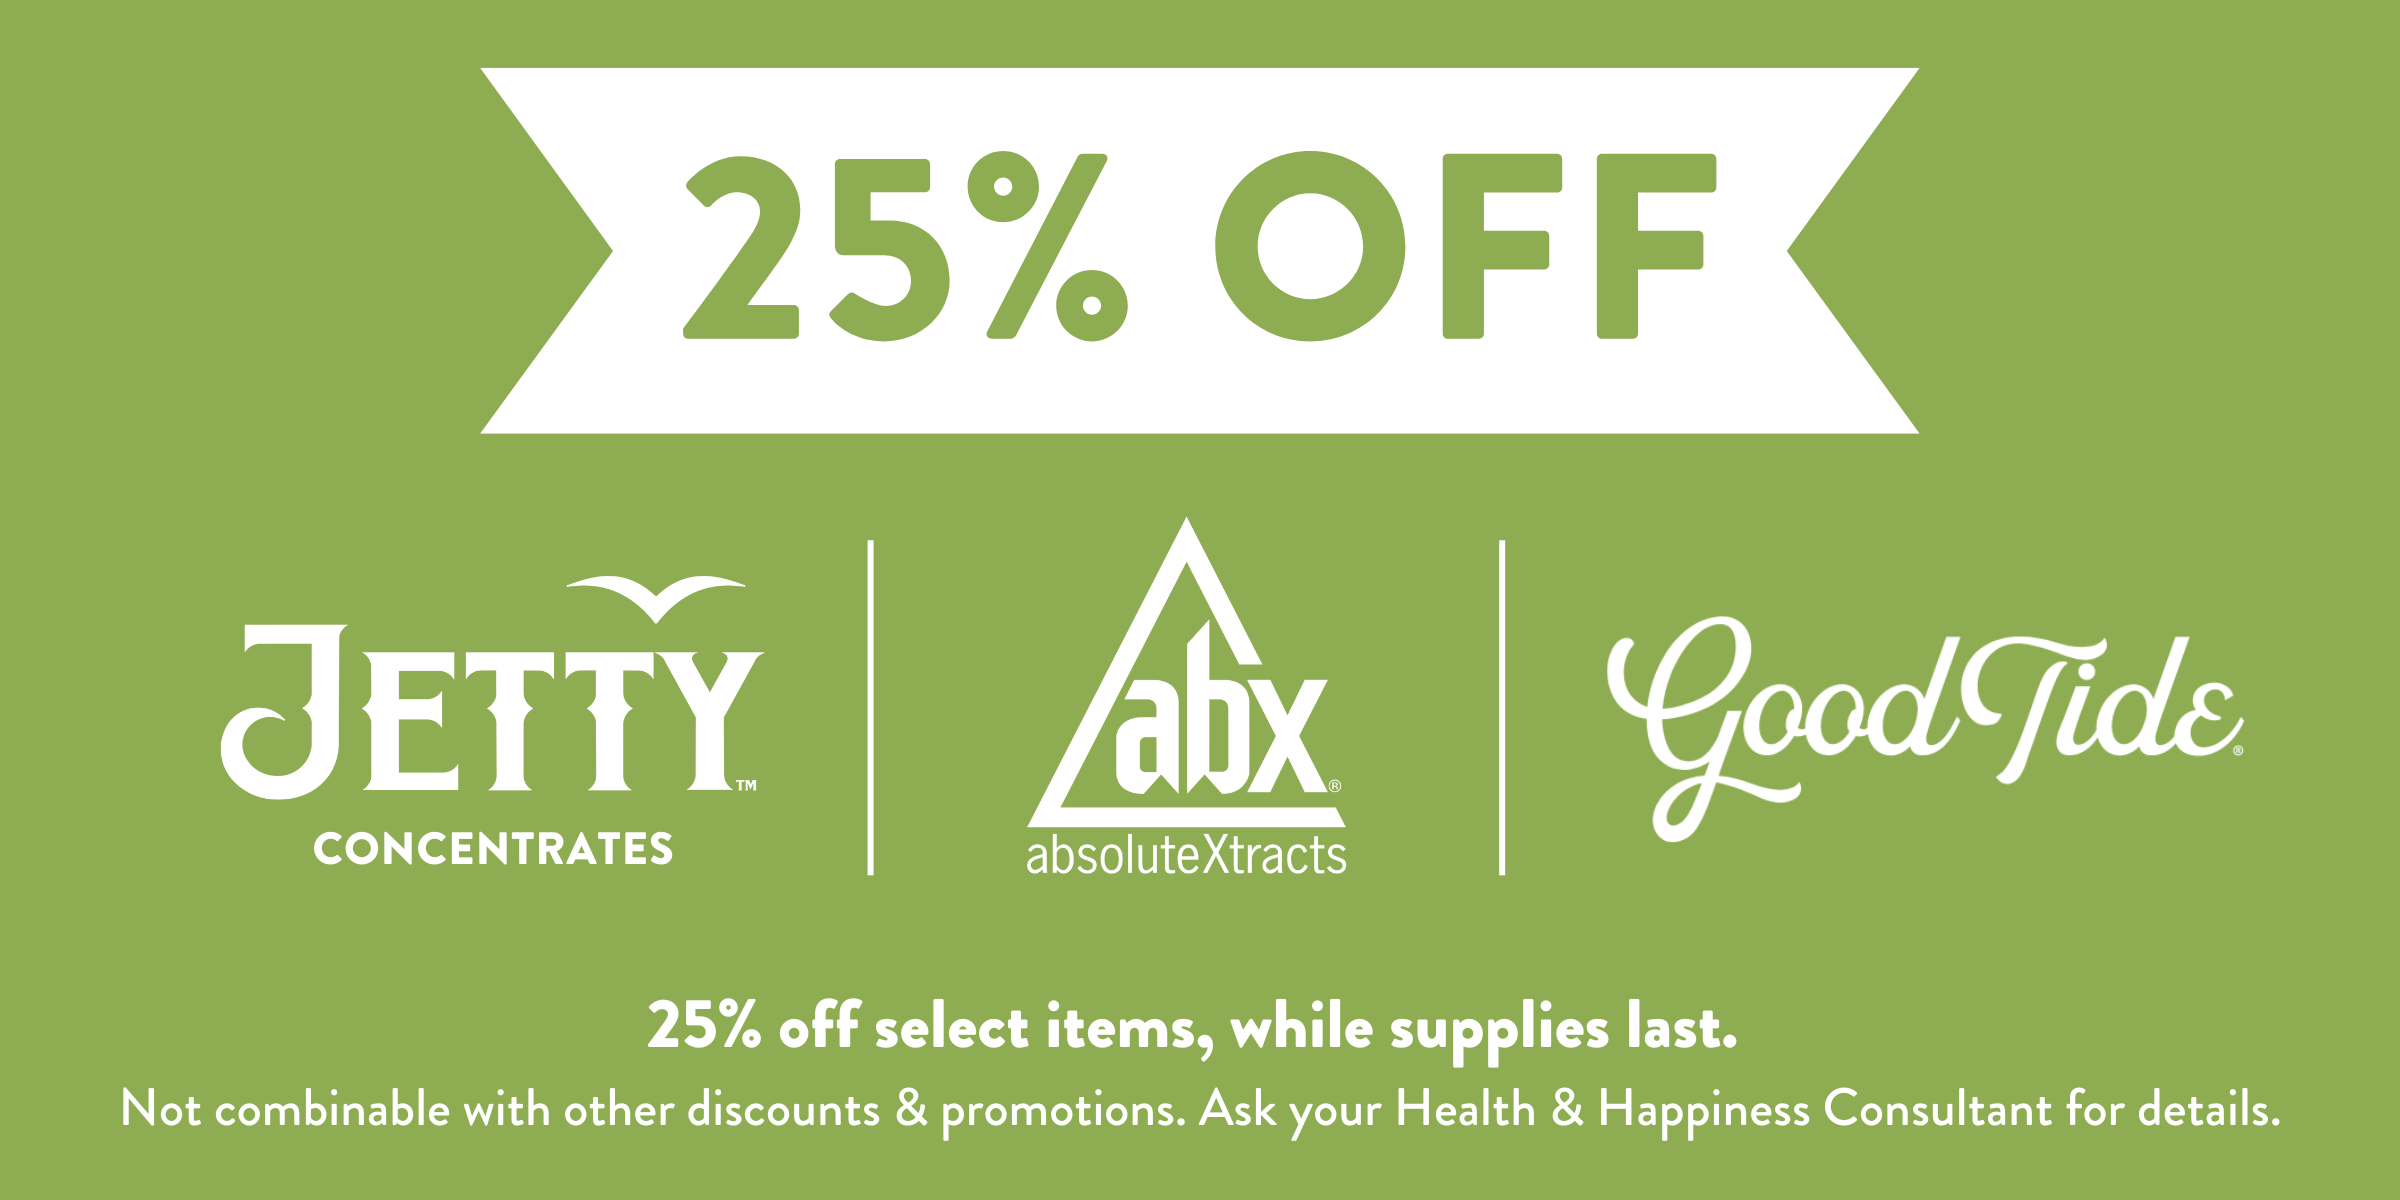 25% off Jetty Concentrates, ABX Vapes, Good Tide